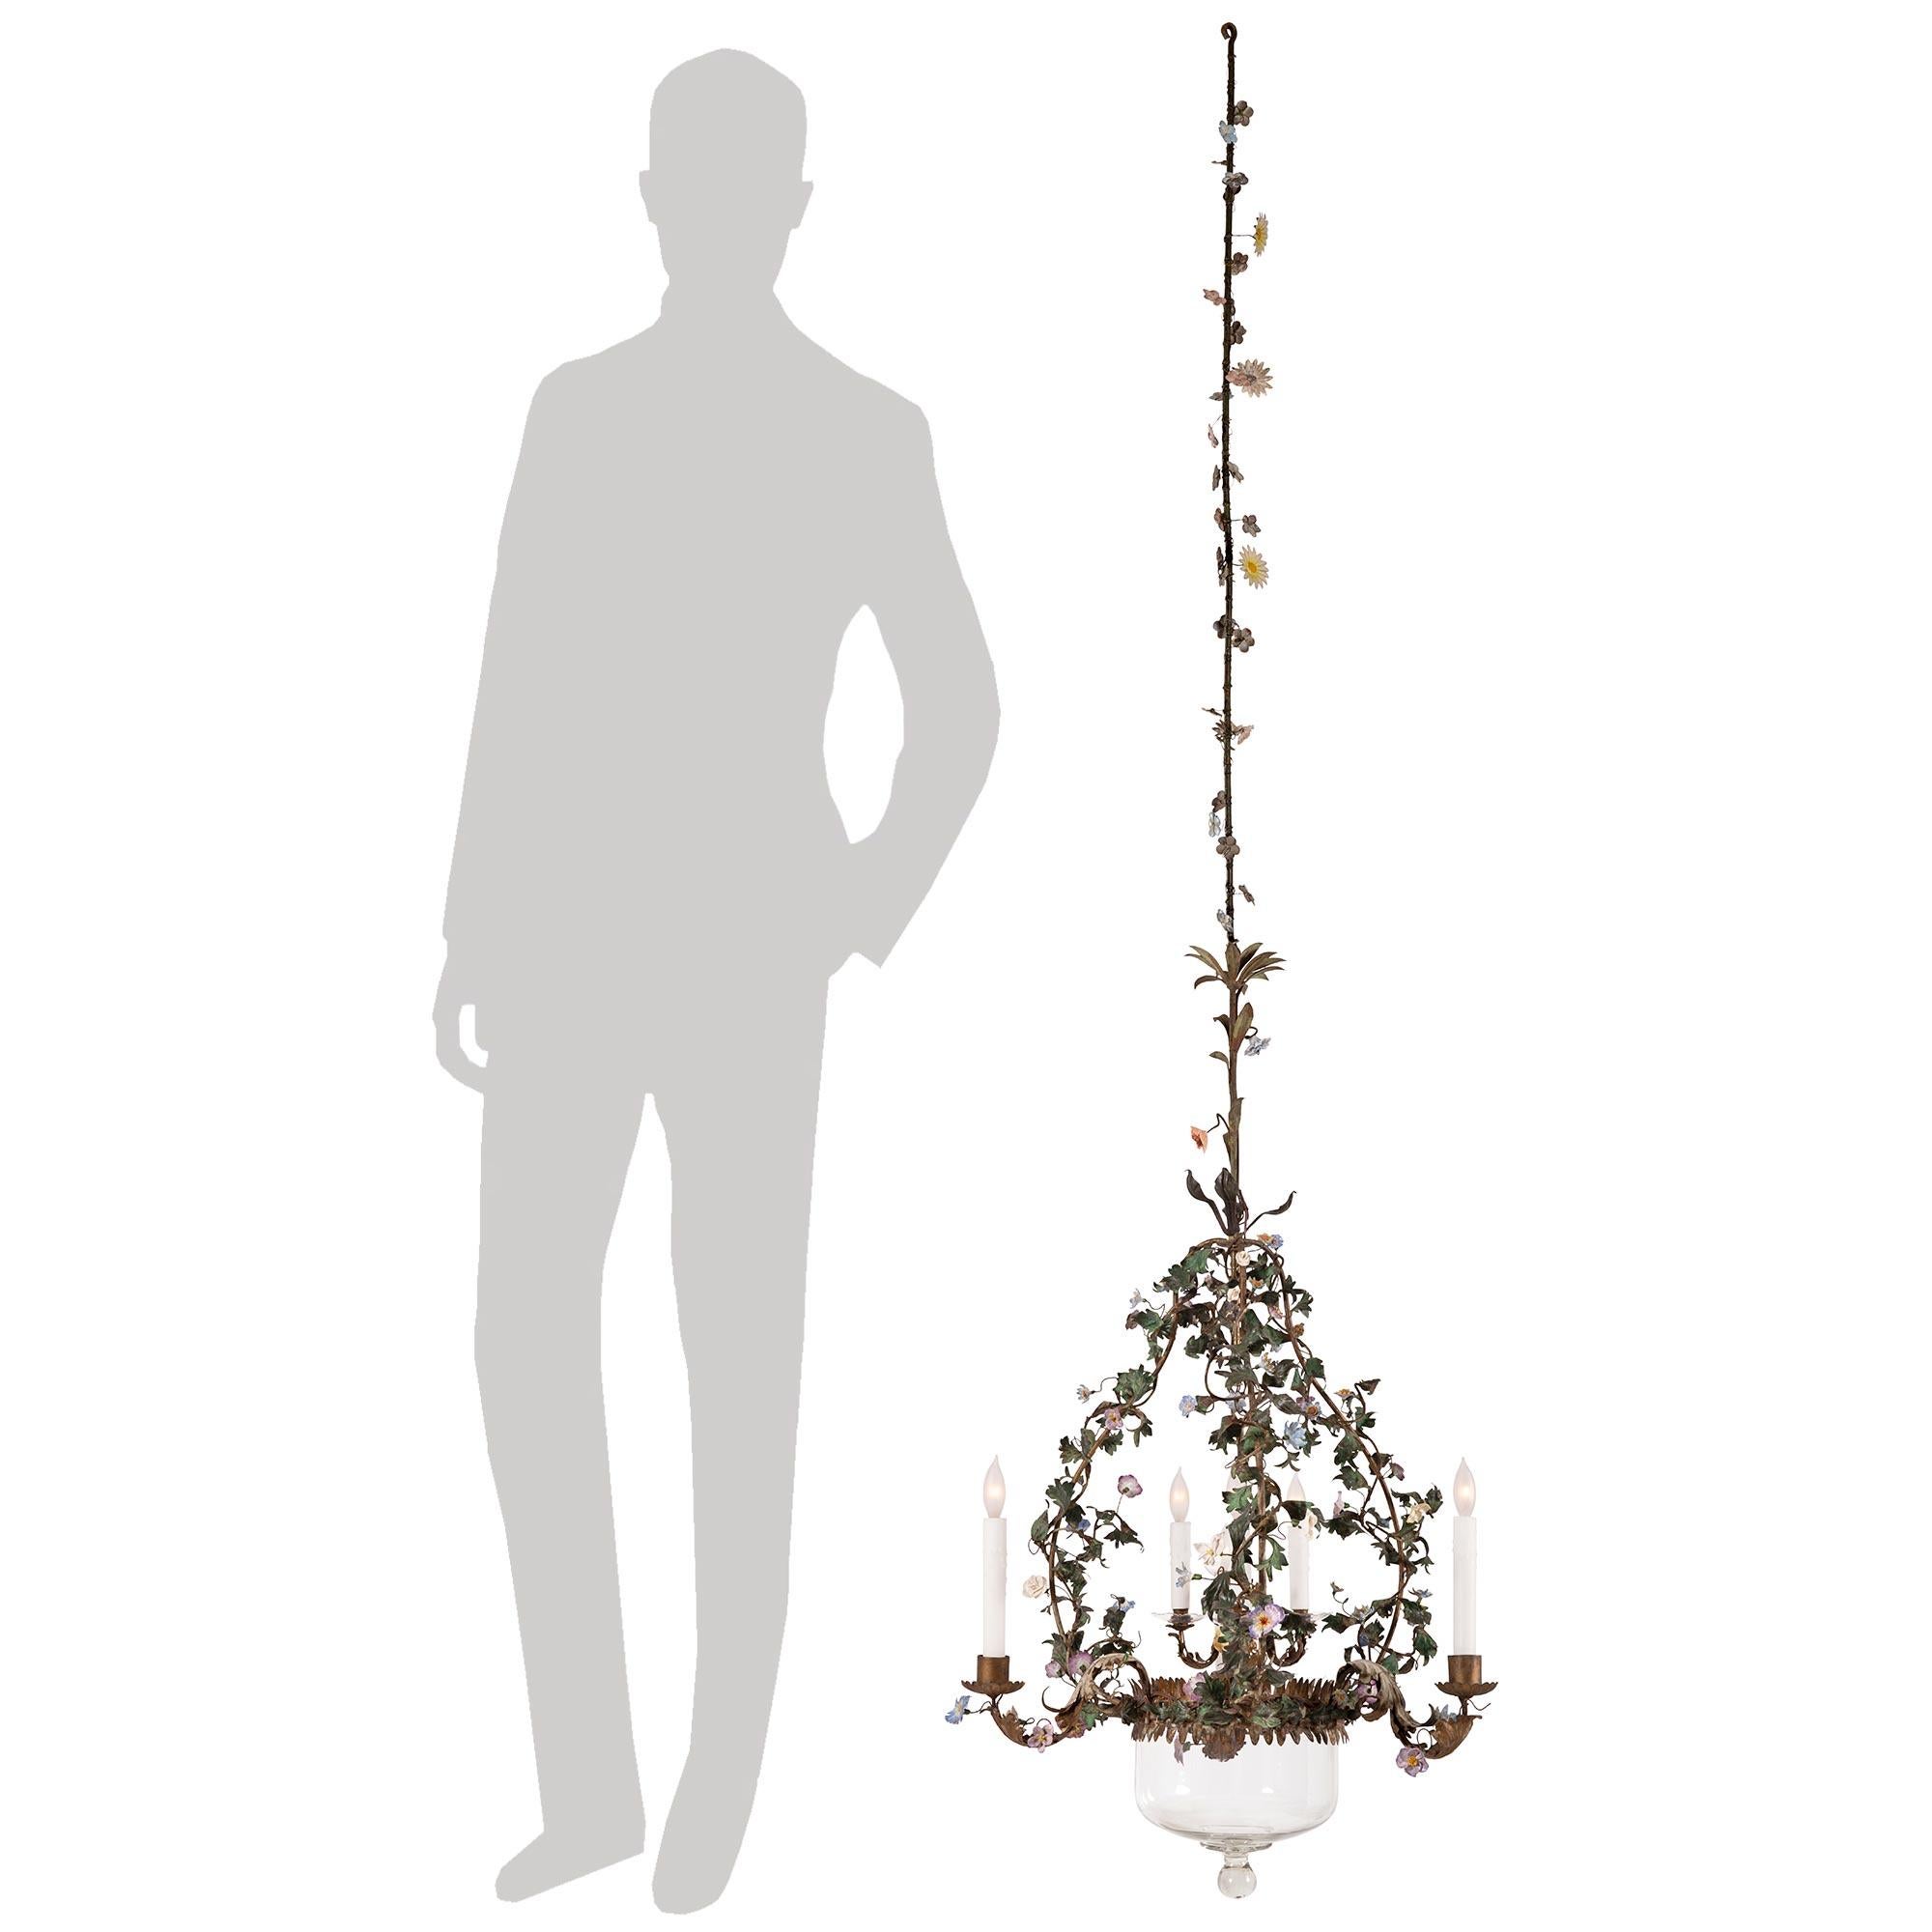 A beautiful and most charming Italian 19th century Louis XVI st. Saxe porcelain, glass, tole, and gilt metal chandelier. The six arm chandelier is centered by its original most decorative glass dome with a finely mottled bottom finial. At the center